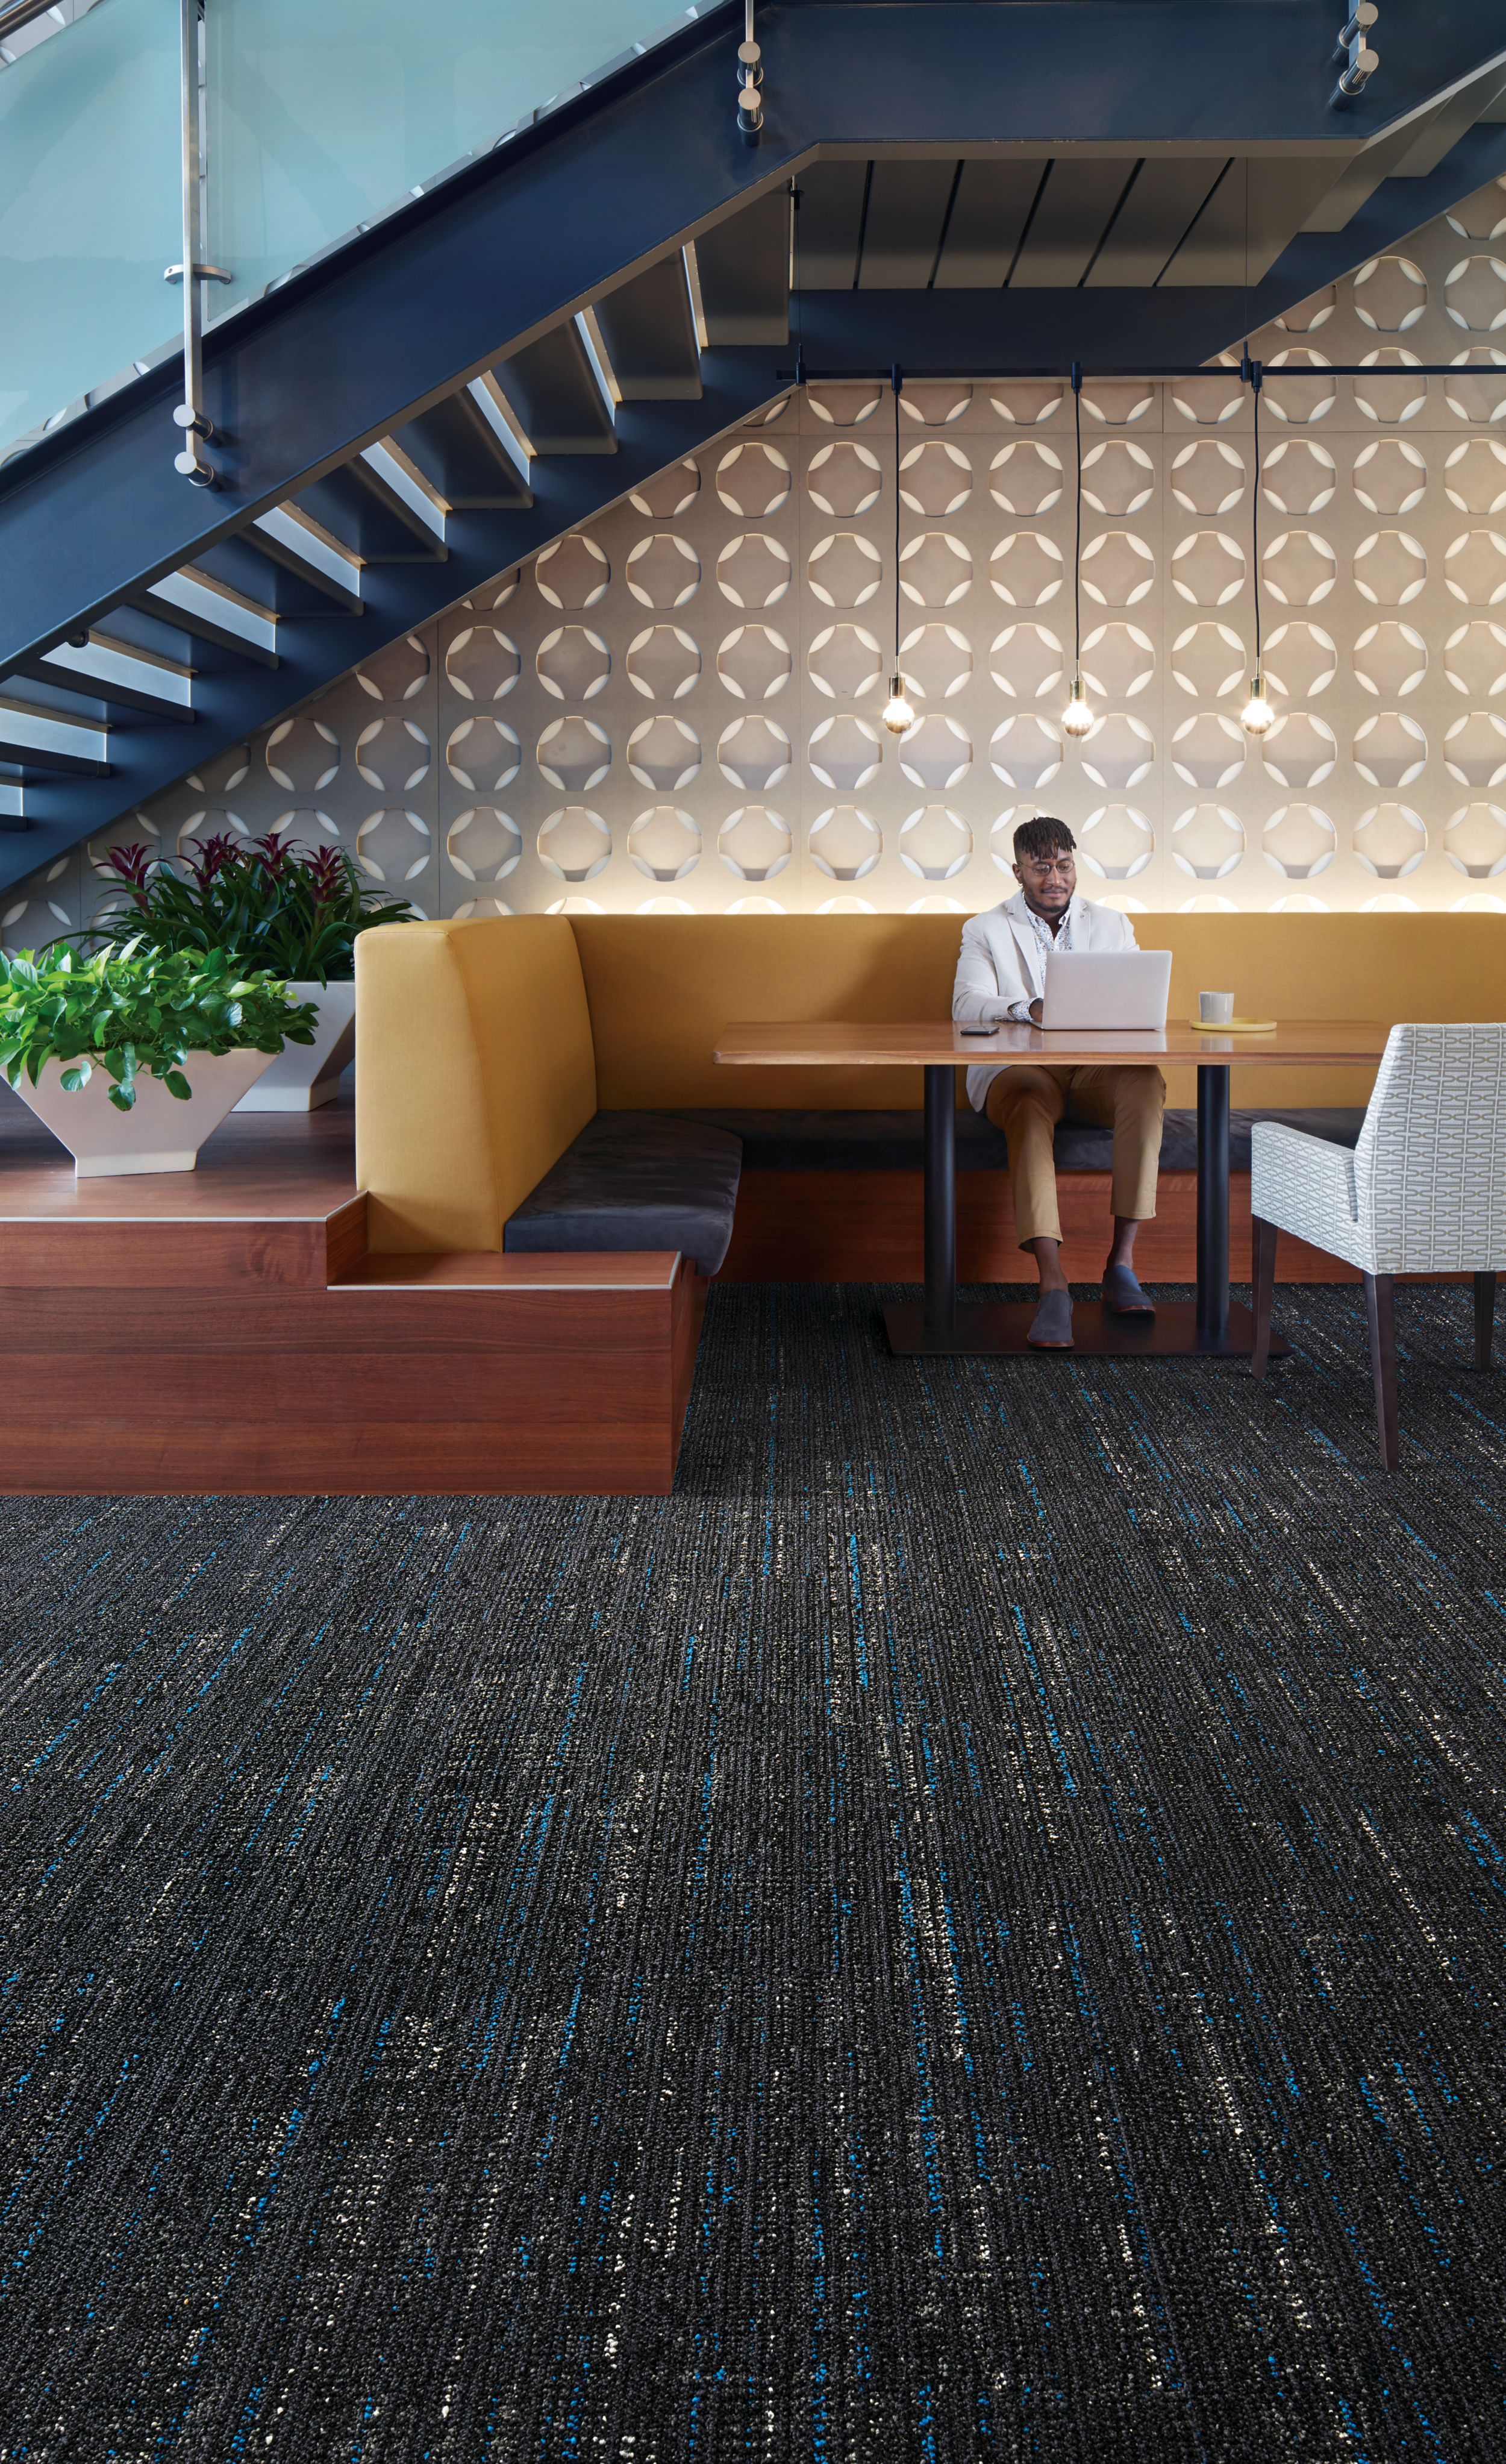 Interface Bitrate plank carpet tile in seating area with stairwell imagen número 10